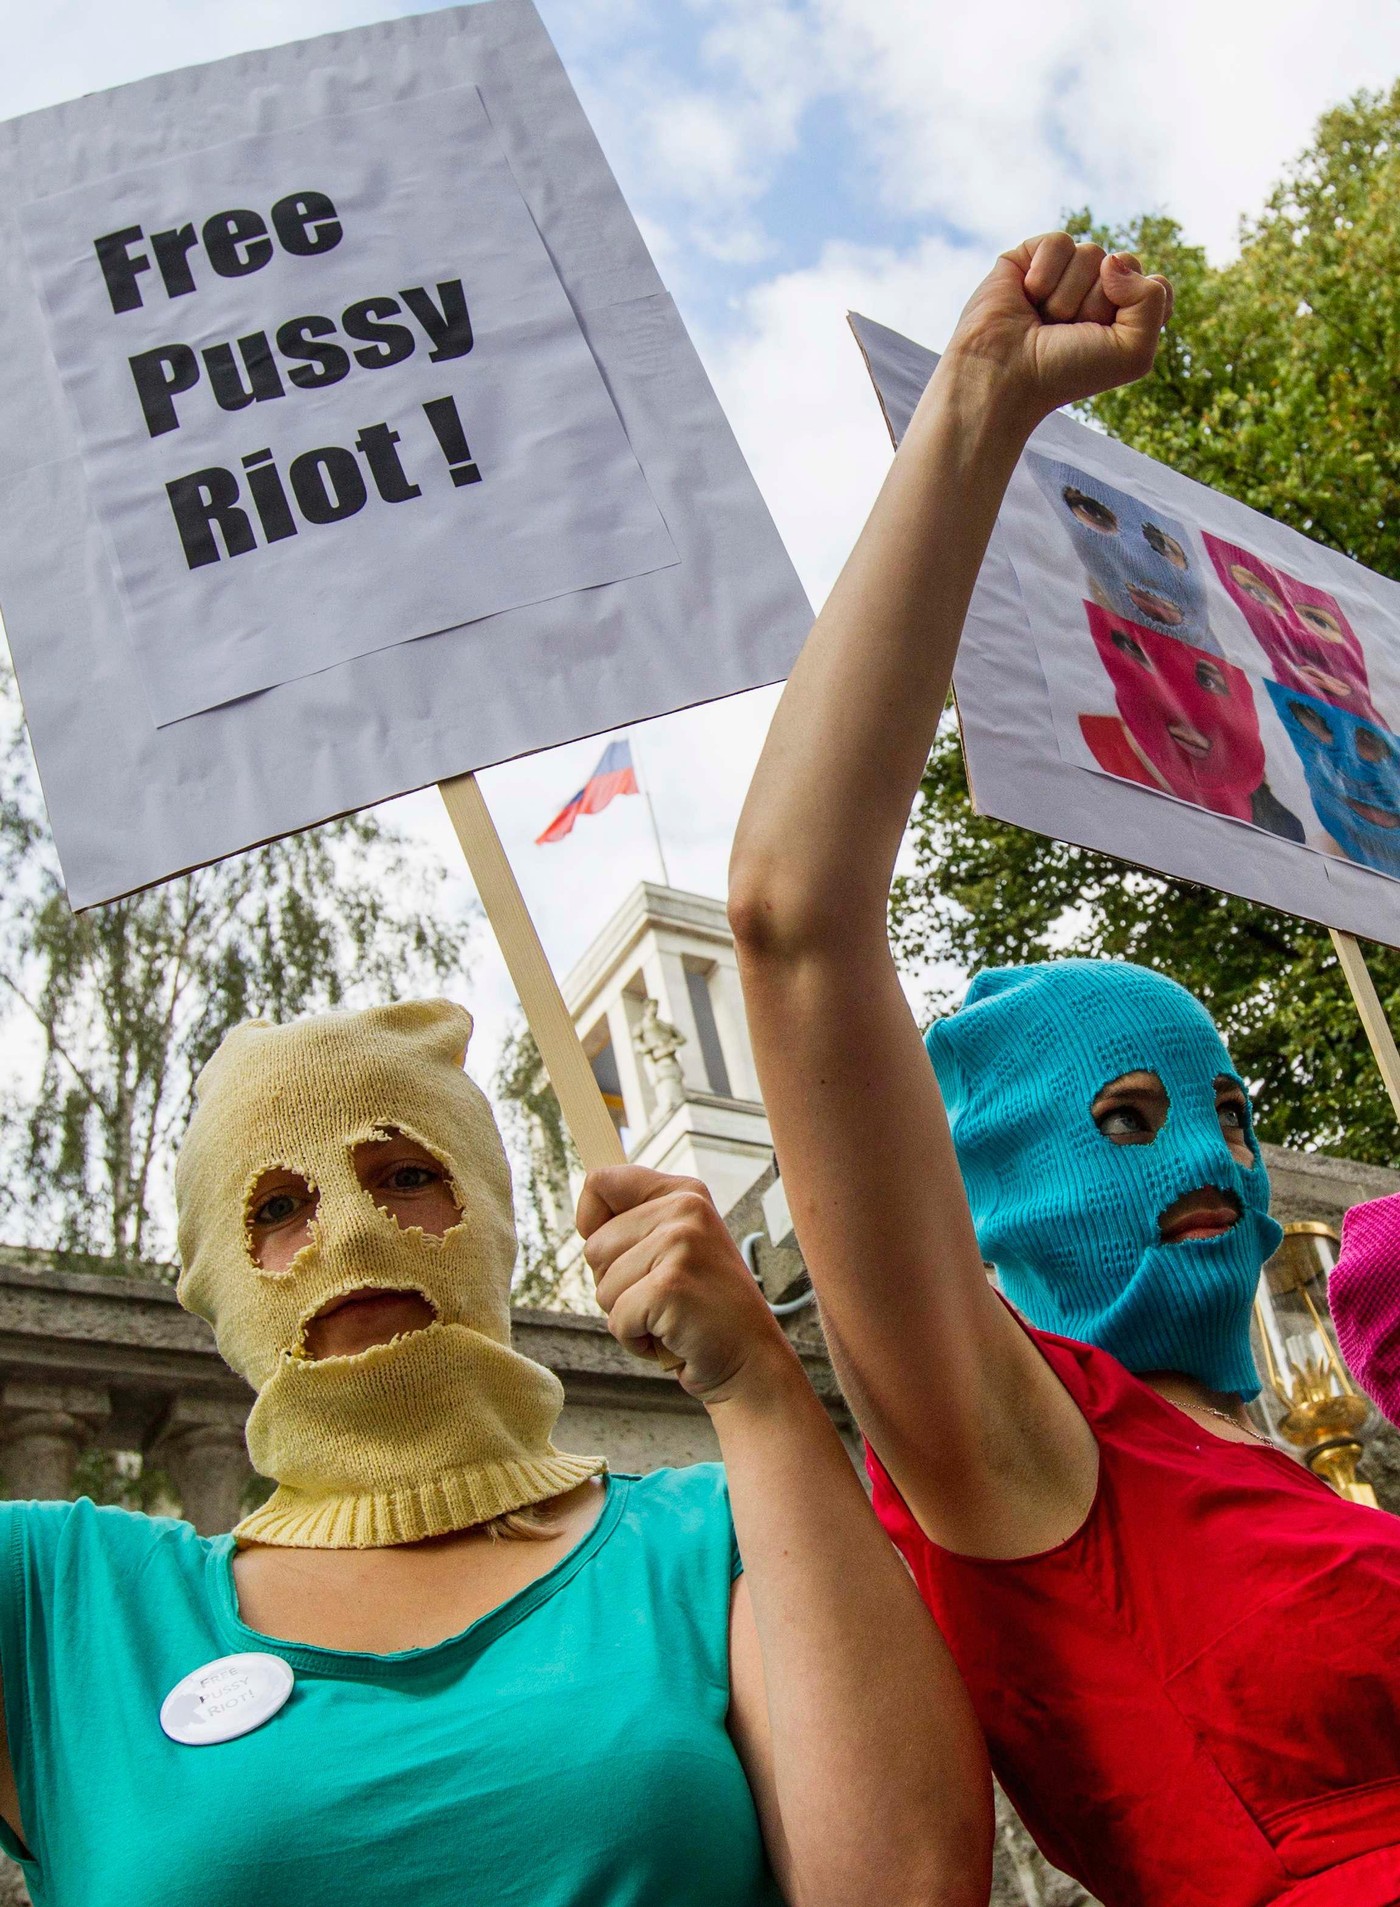 Protesters Wear Balaclavas And Colourful Dresses In The Style Of The Russian Punk Band Pussy